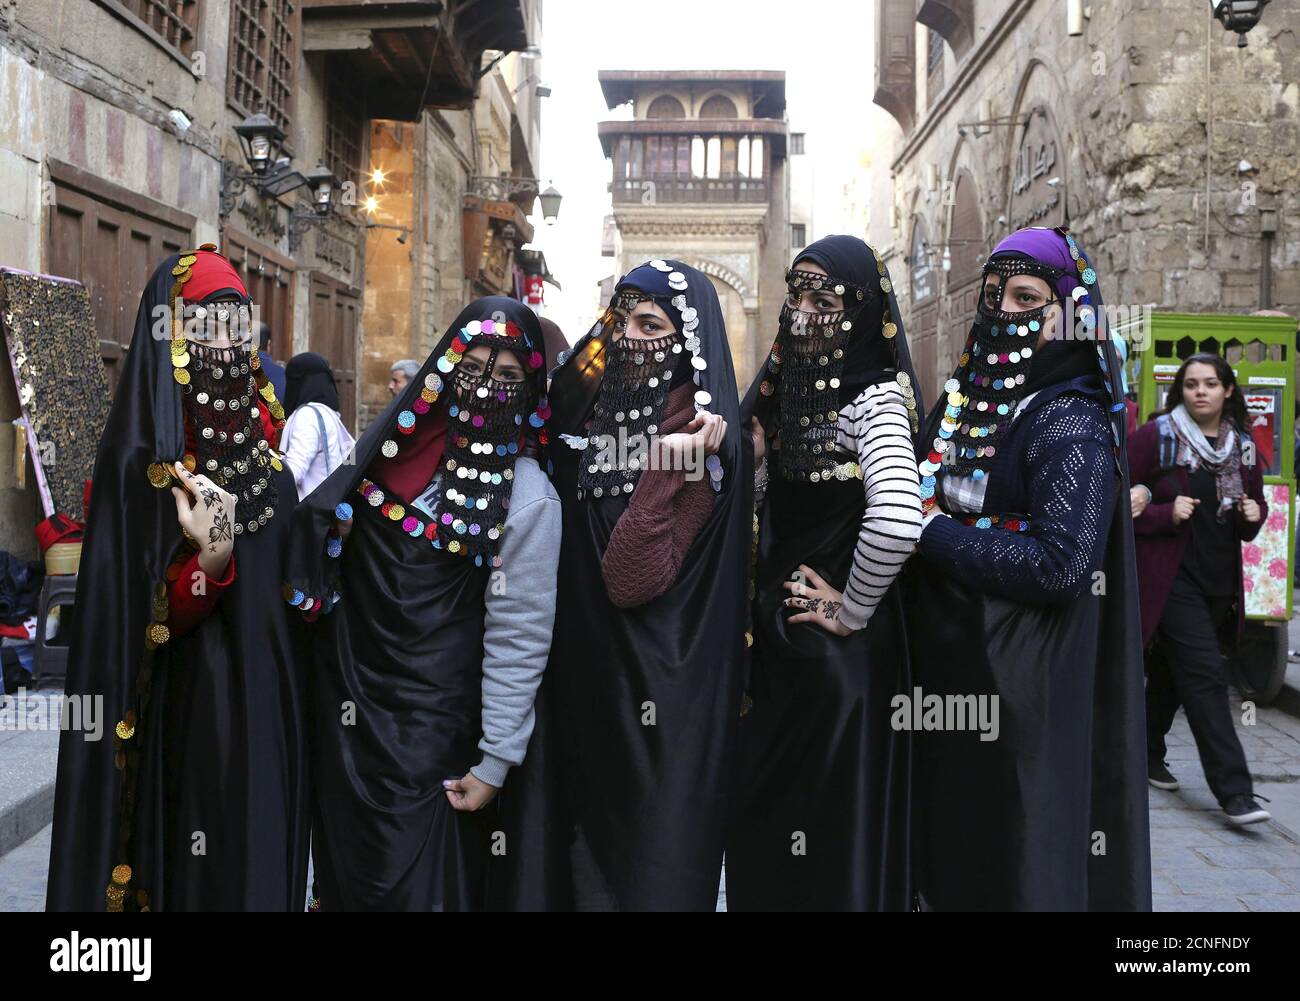 Girls dressed up in traditional Egyptian clothes from the early 20th century pose for a picture before they get their photos taken on the historical Al-Moez street of Islamic Cairo, Egypt, January 17, 2016.  REUTERS/Asmaa Waguih Stock Photo